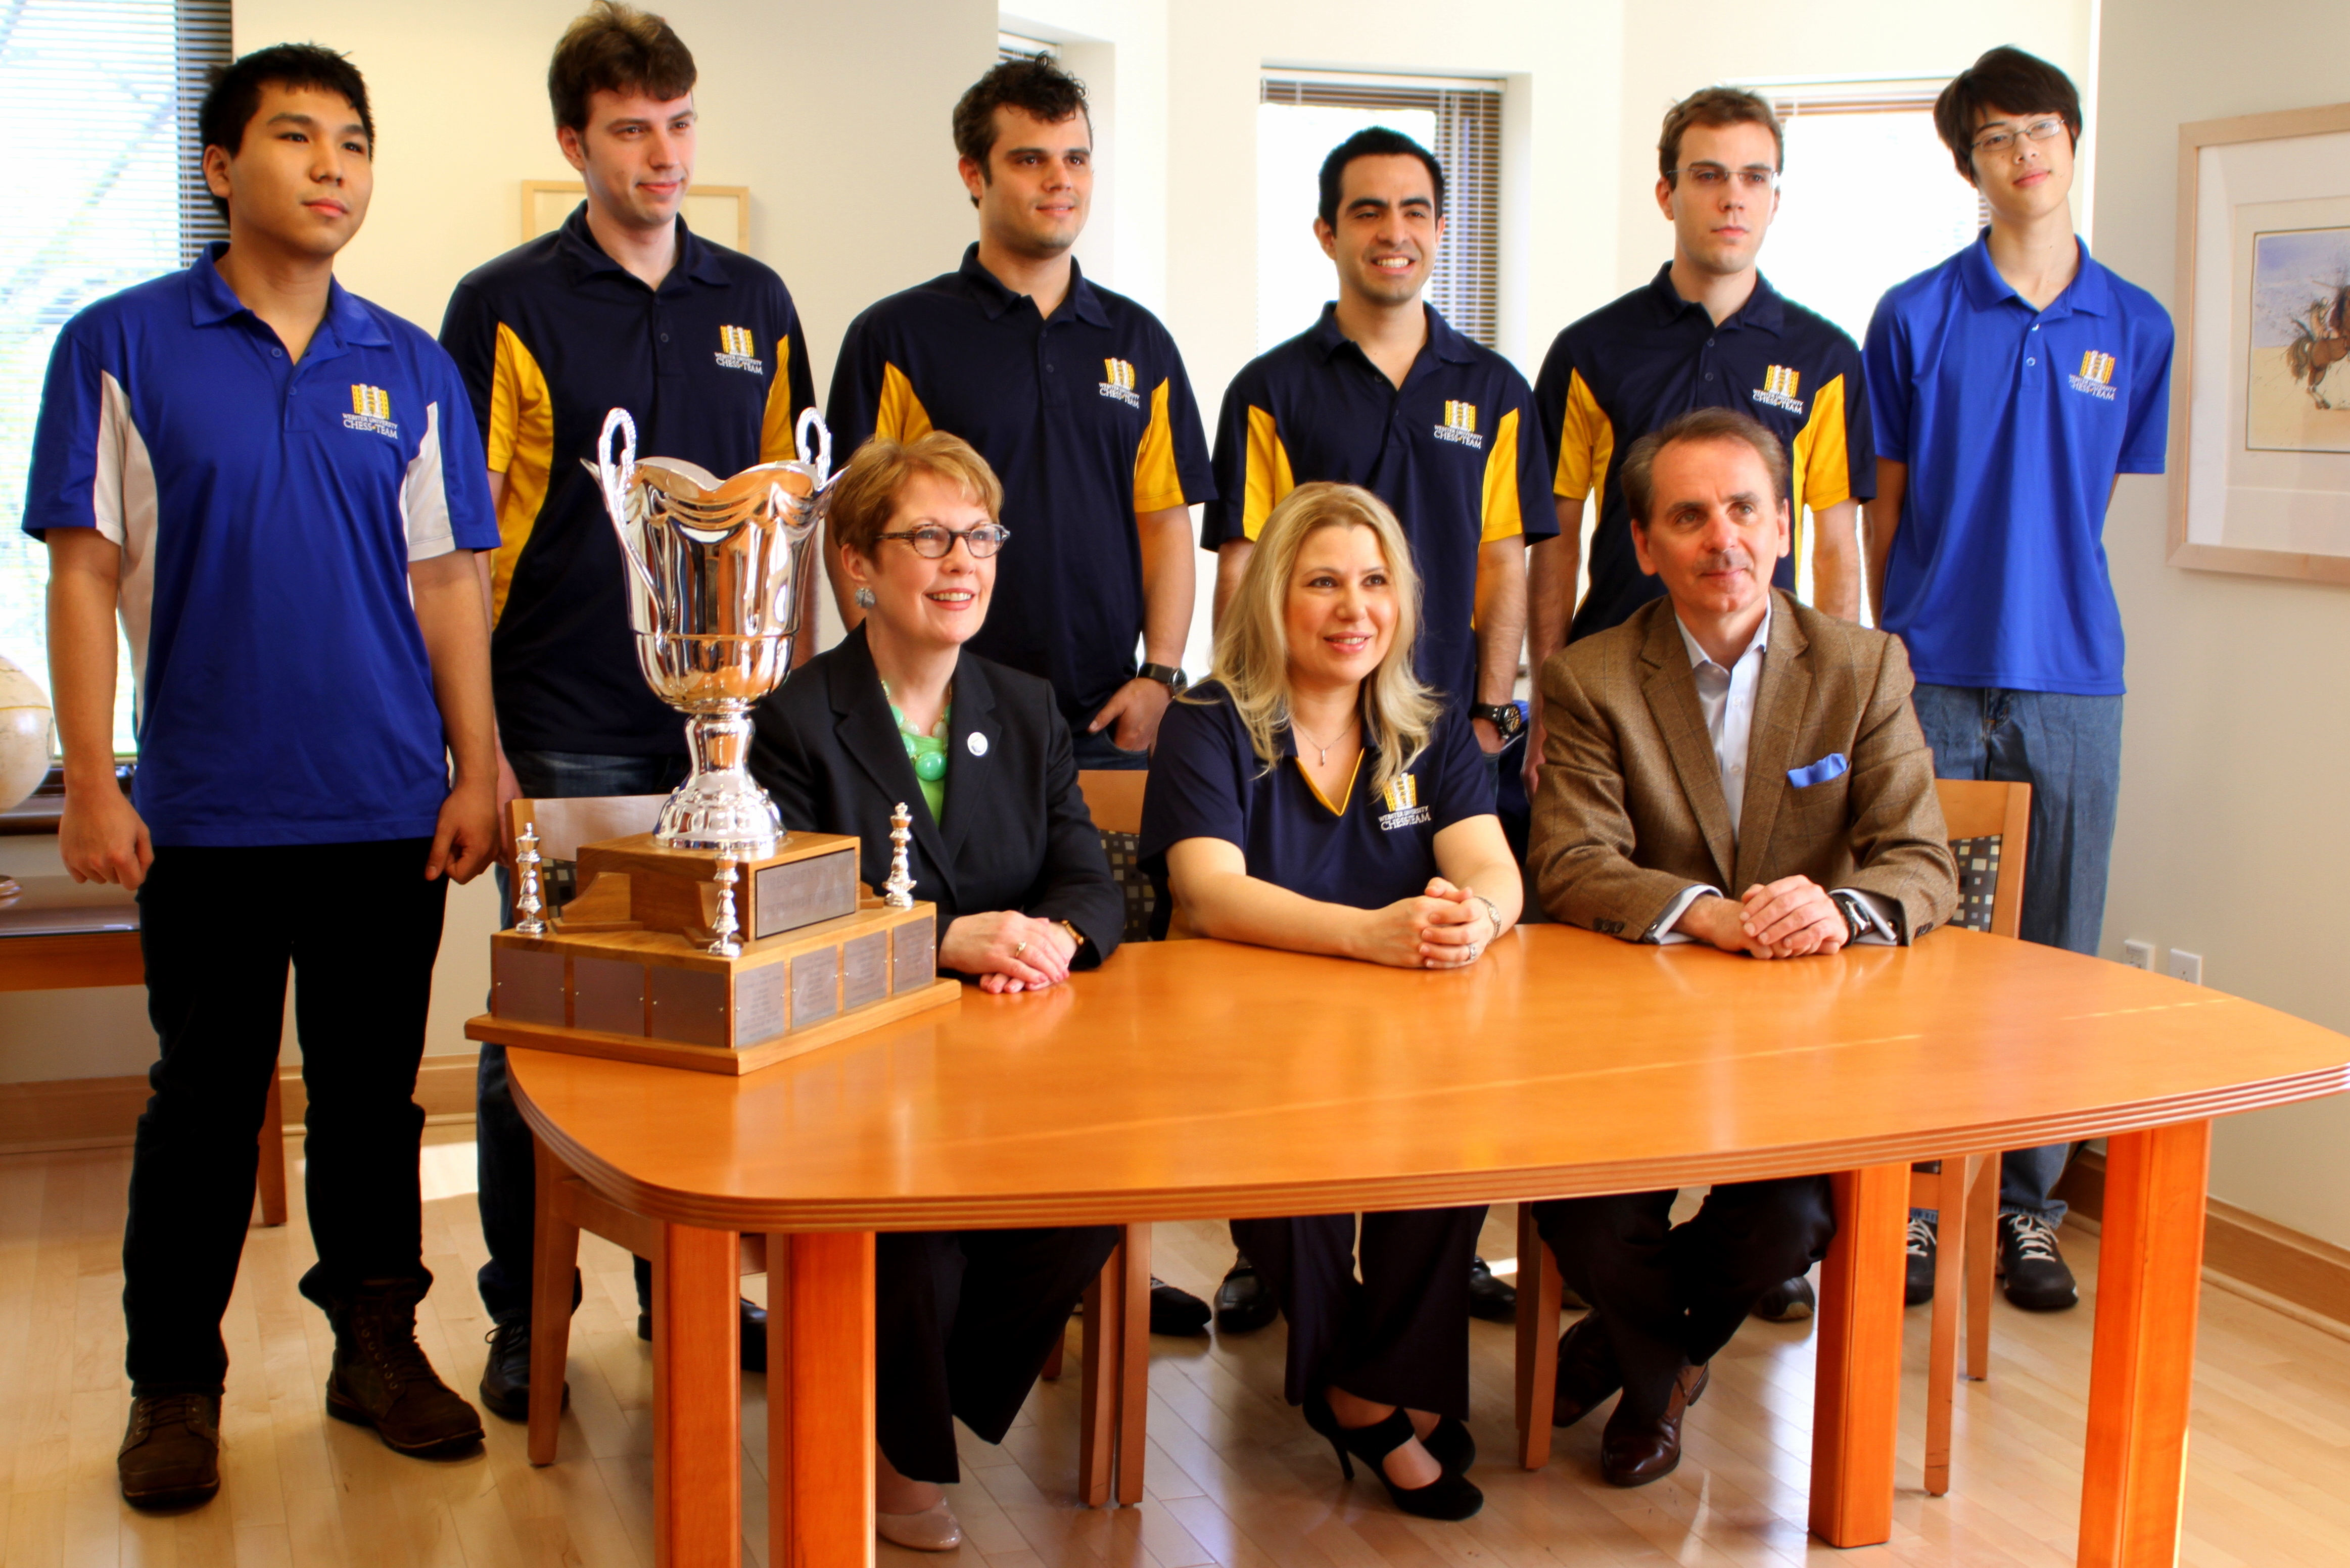 Susan Polgar, College Chess Men's Division I Coach of the Year, reigning and 3 consecutive Final Four Champion Coach